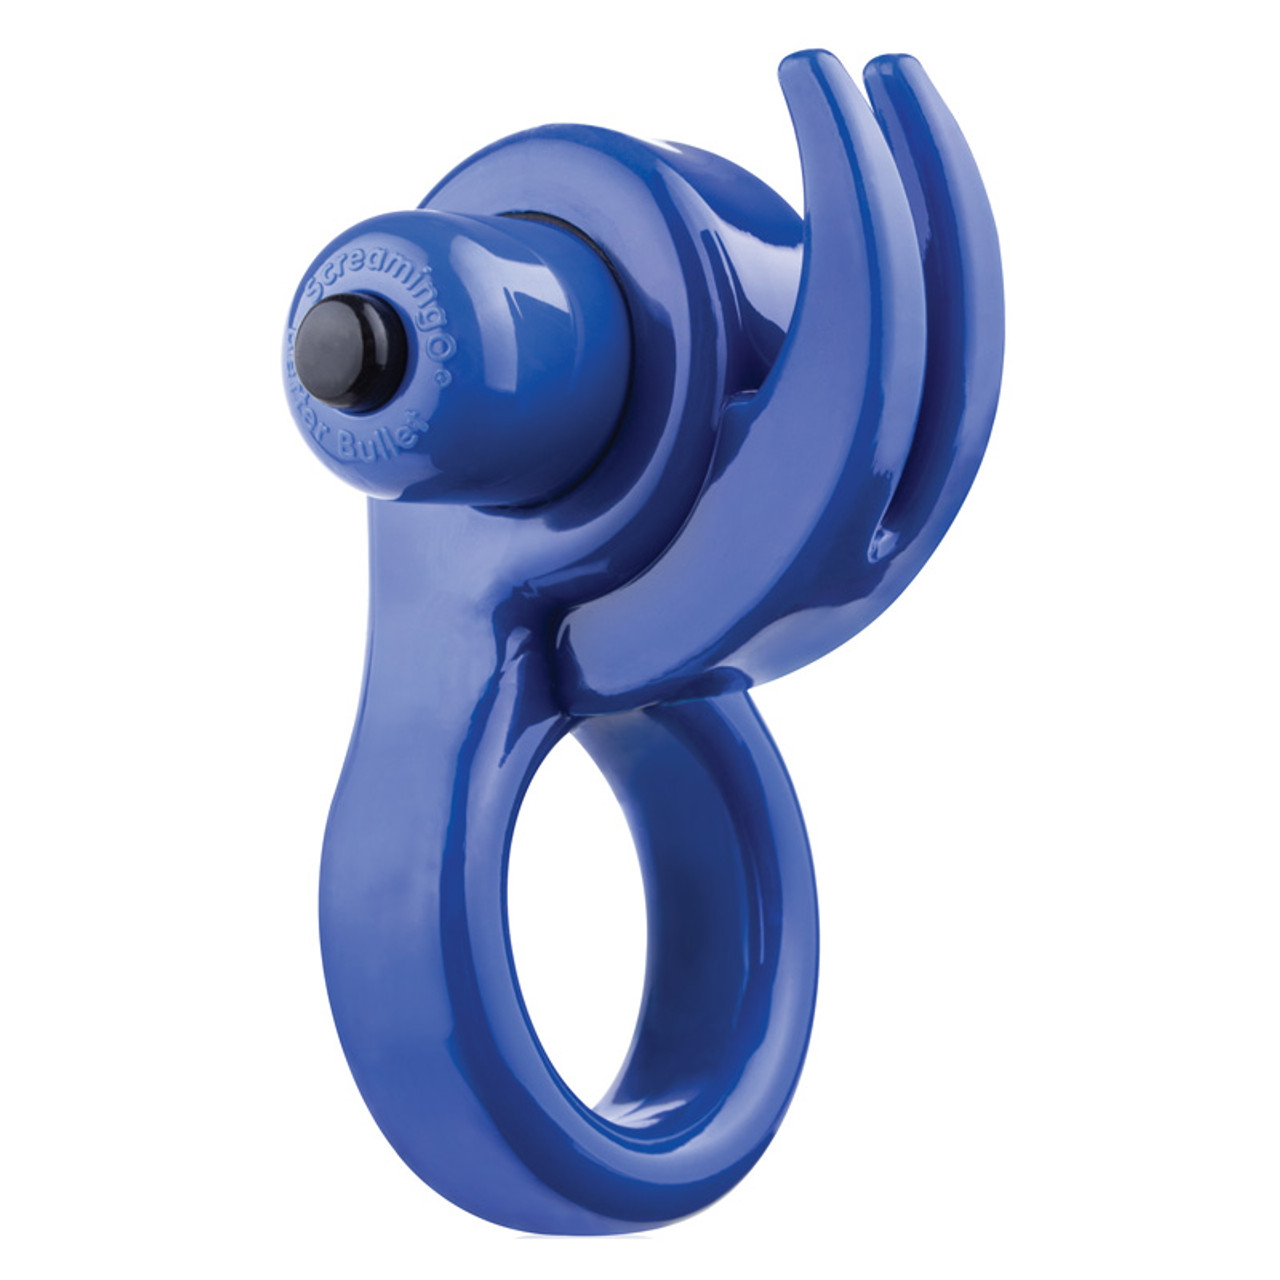 Screaming O 'Orny Rumbling 4-function Silicone Penis Ring with Horns  Blueberry - Dallas Novelty - Online Sex Toys Retailer